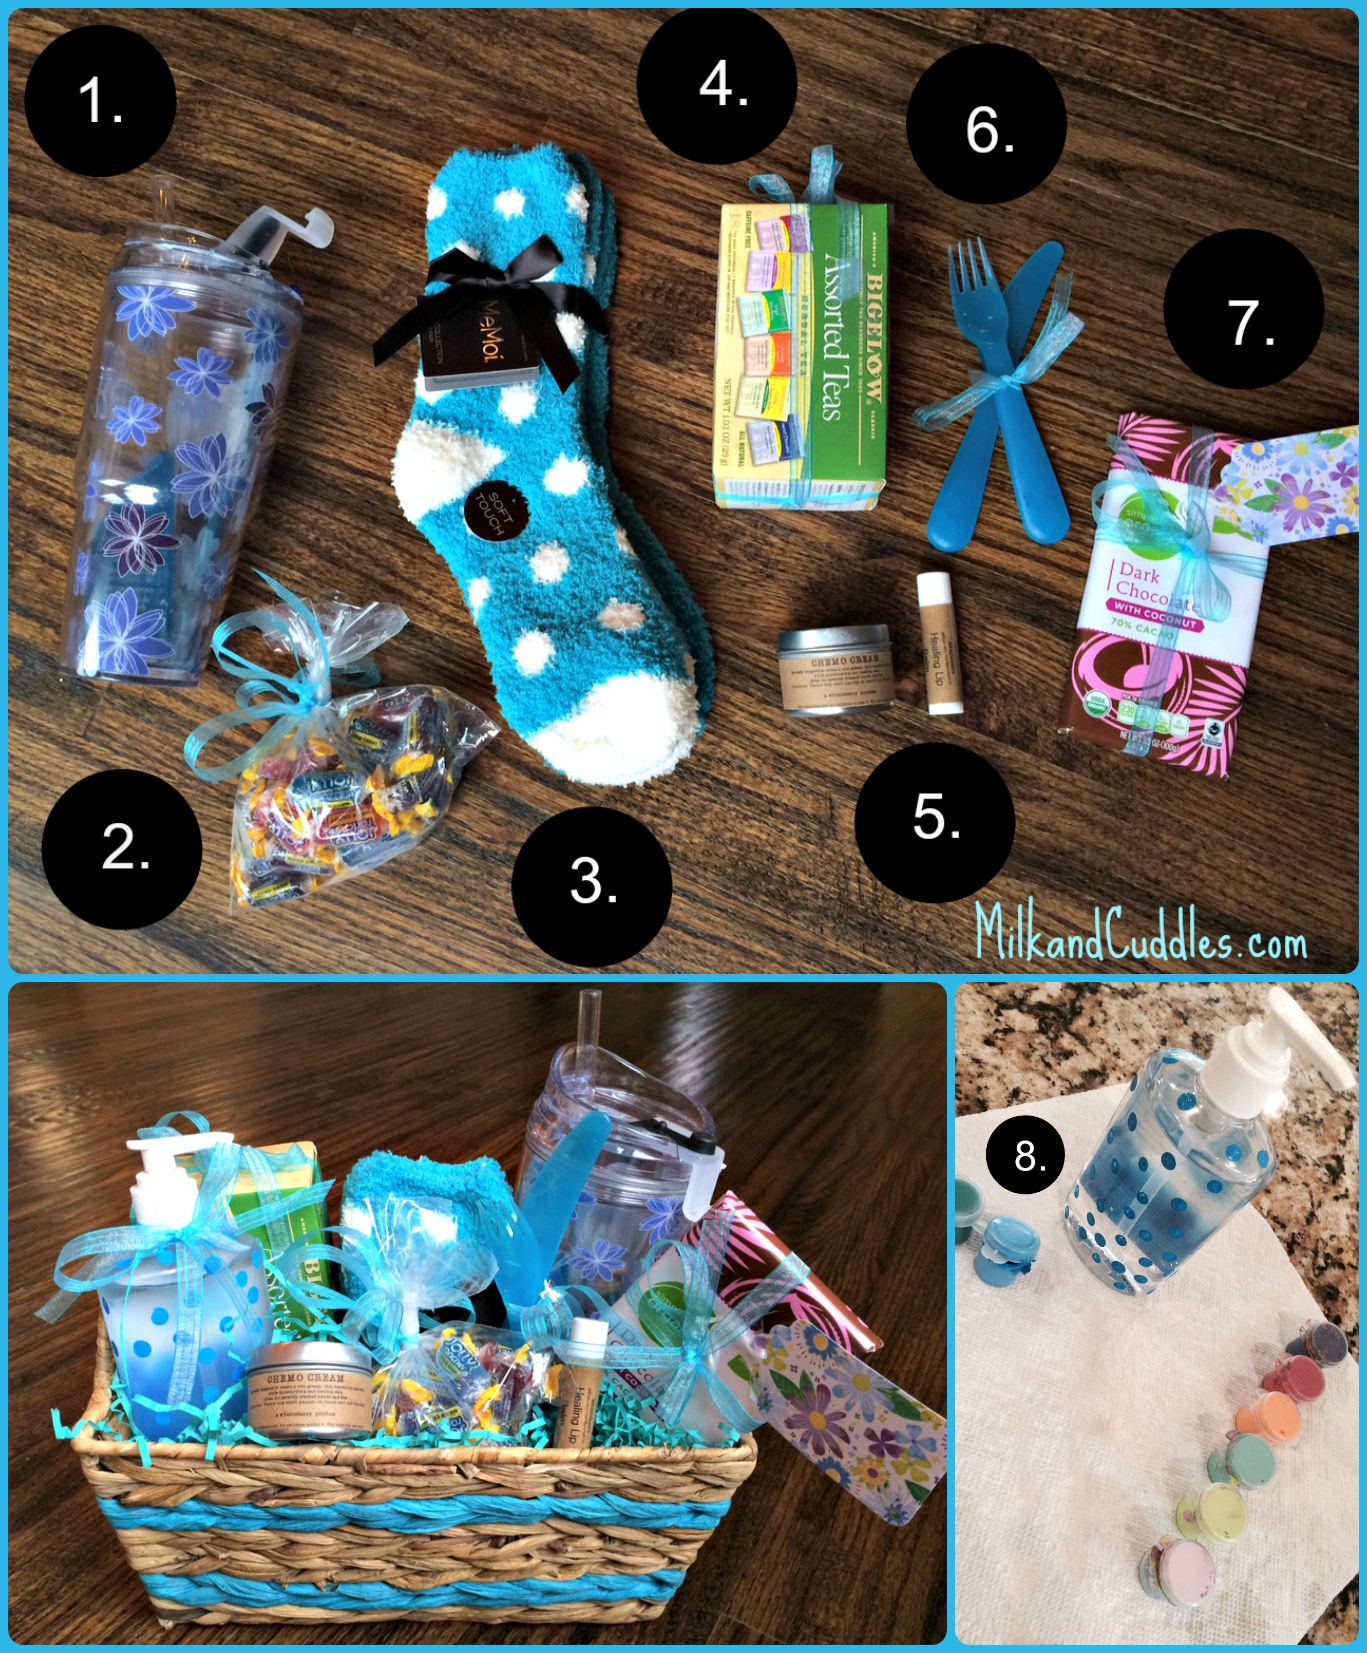 Gift Basket Ideas For Cancer Patients
 Gift Basket Ideas for someone going through Chemo